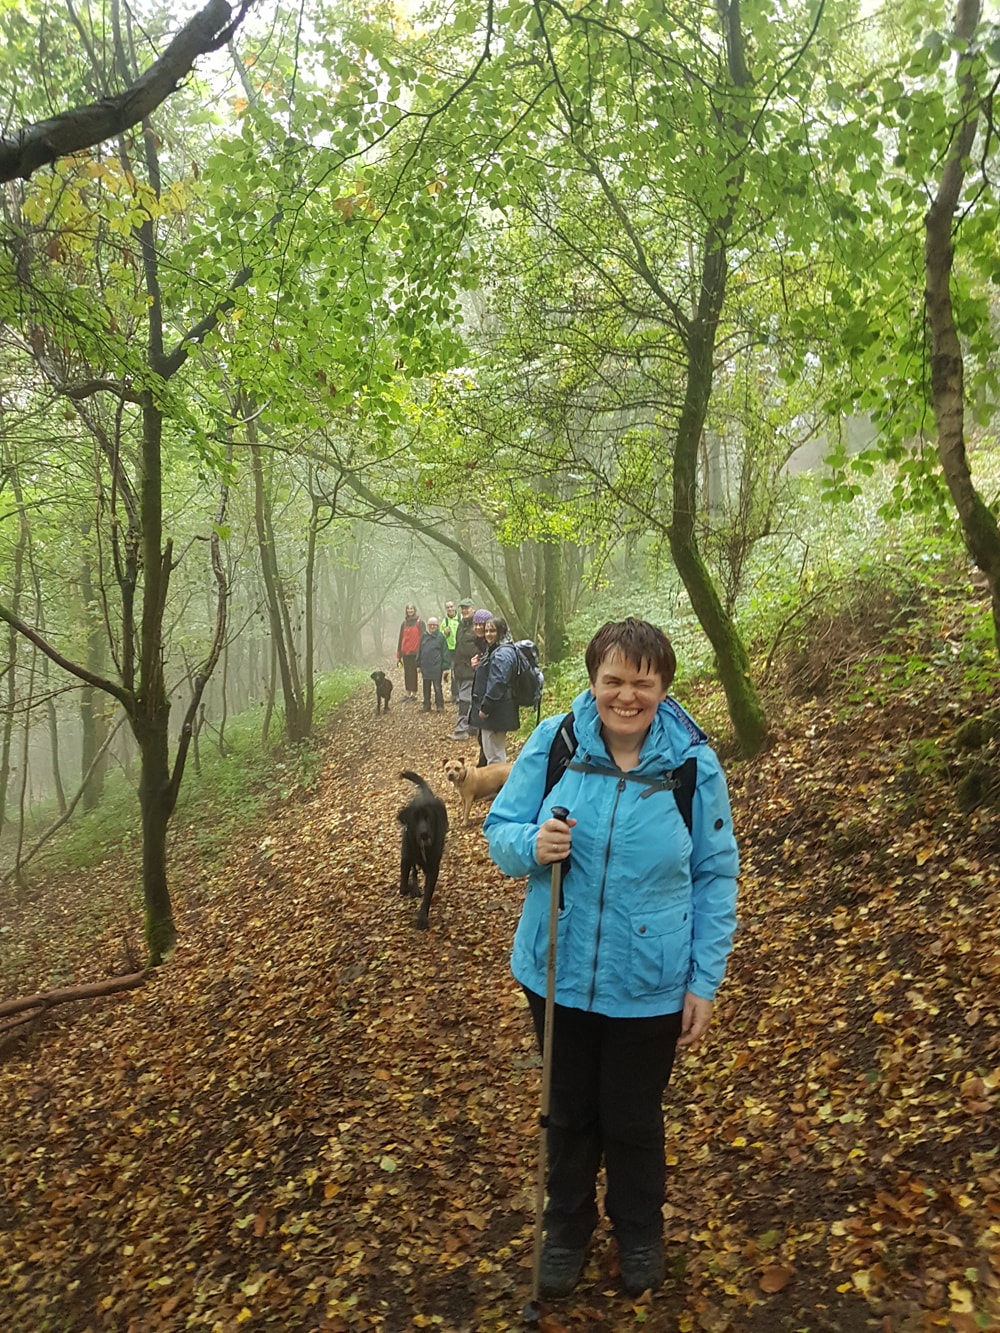 A group of walkers with dogs on a woodland path